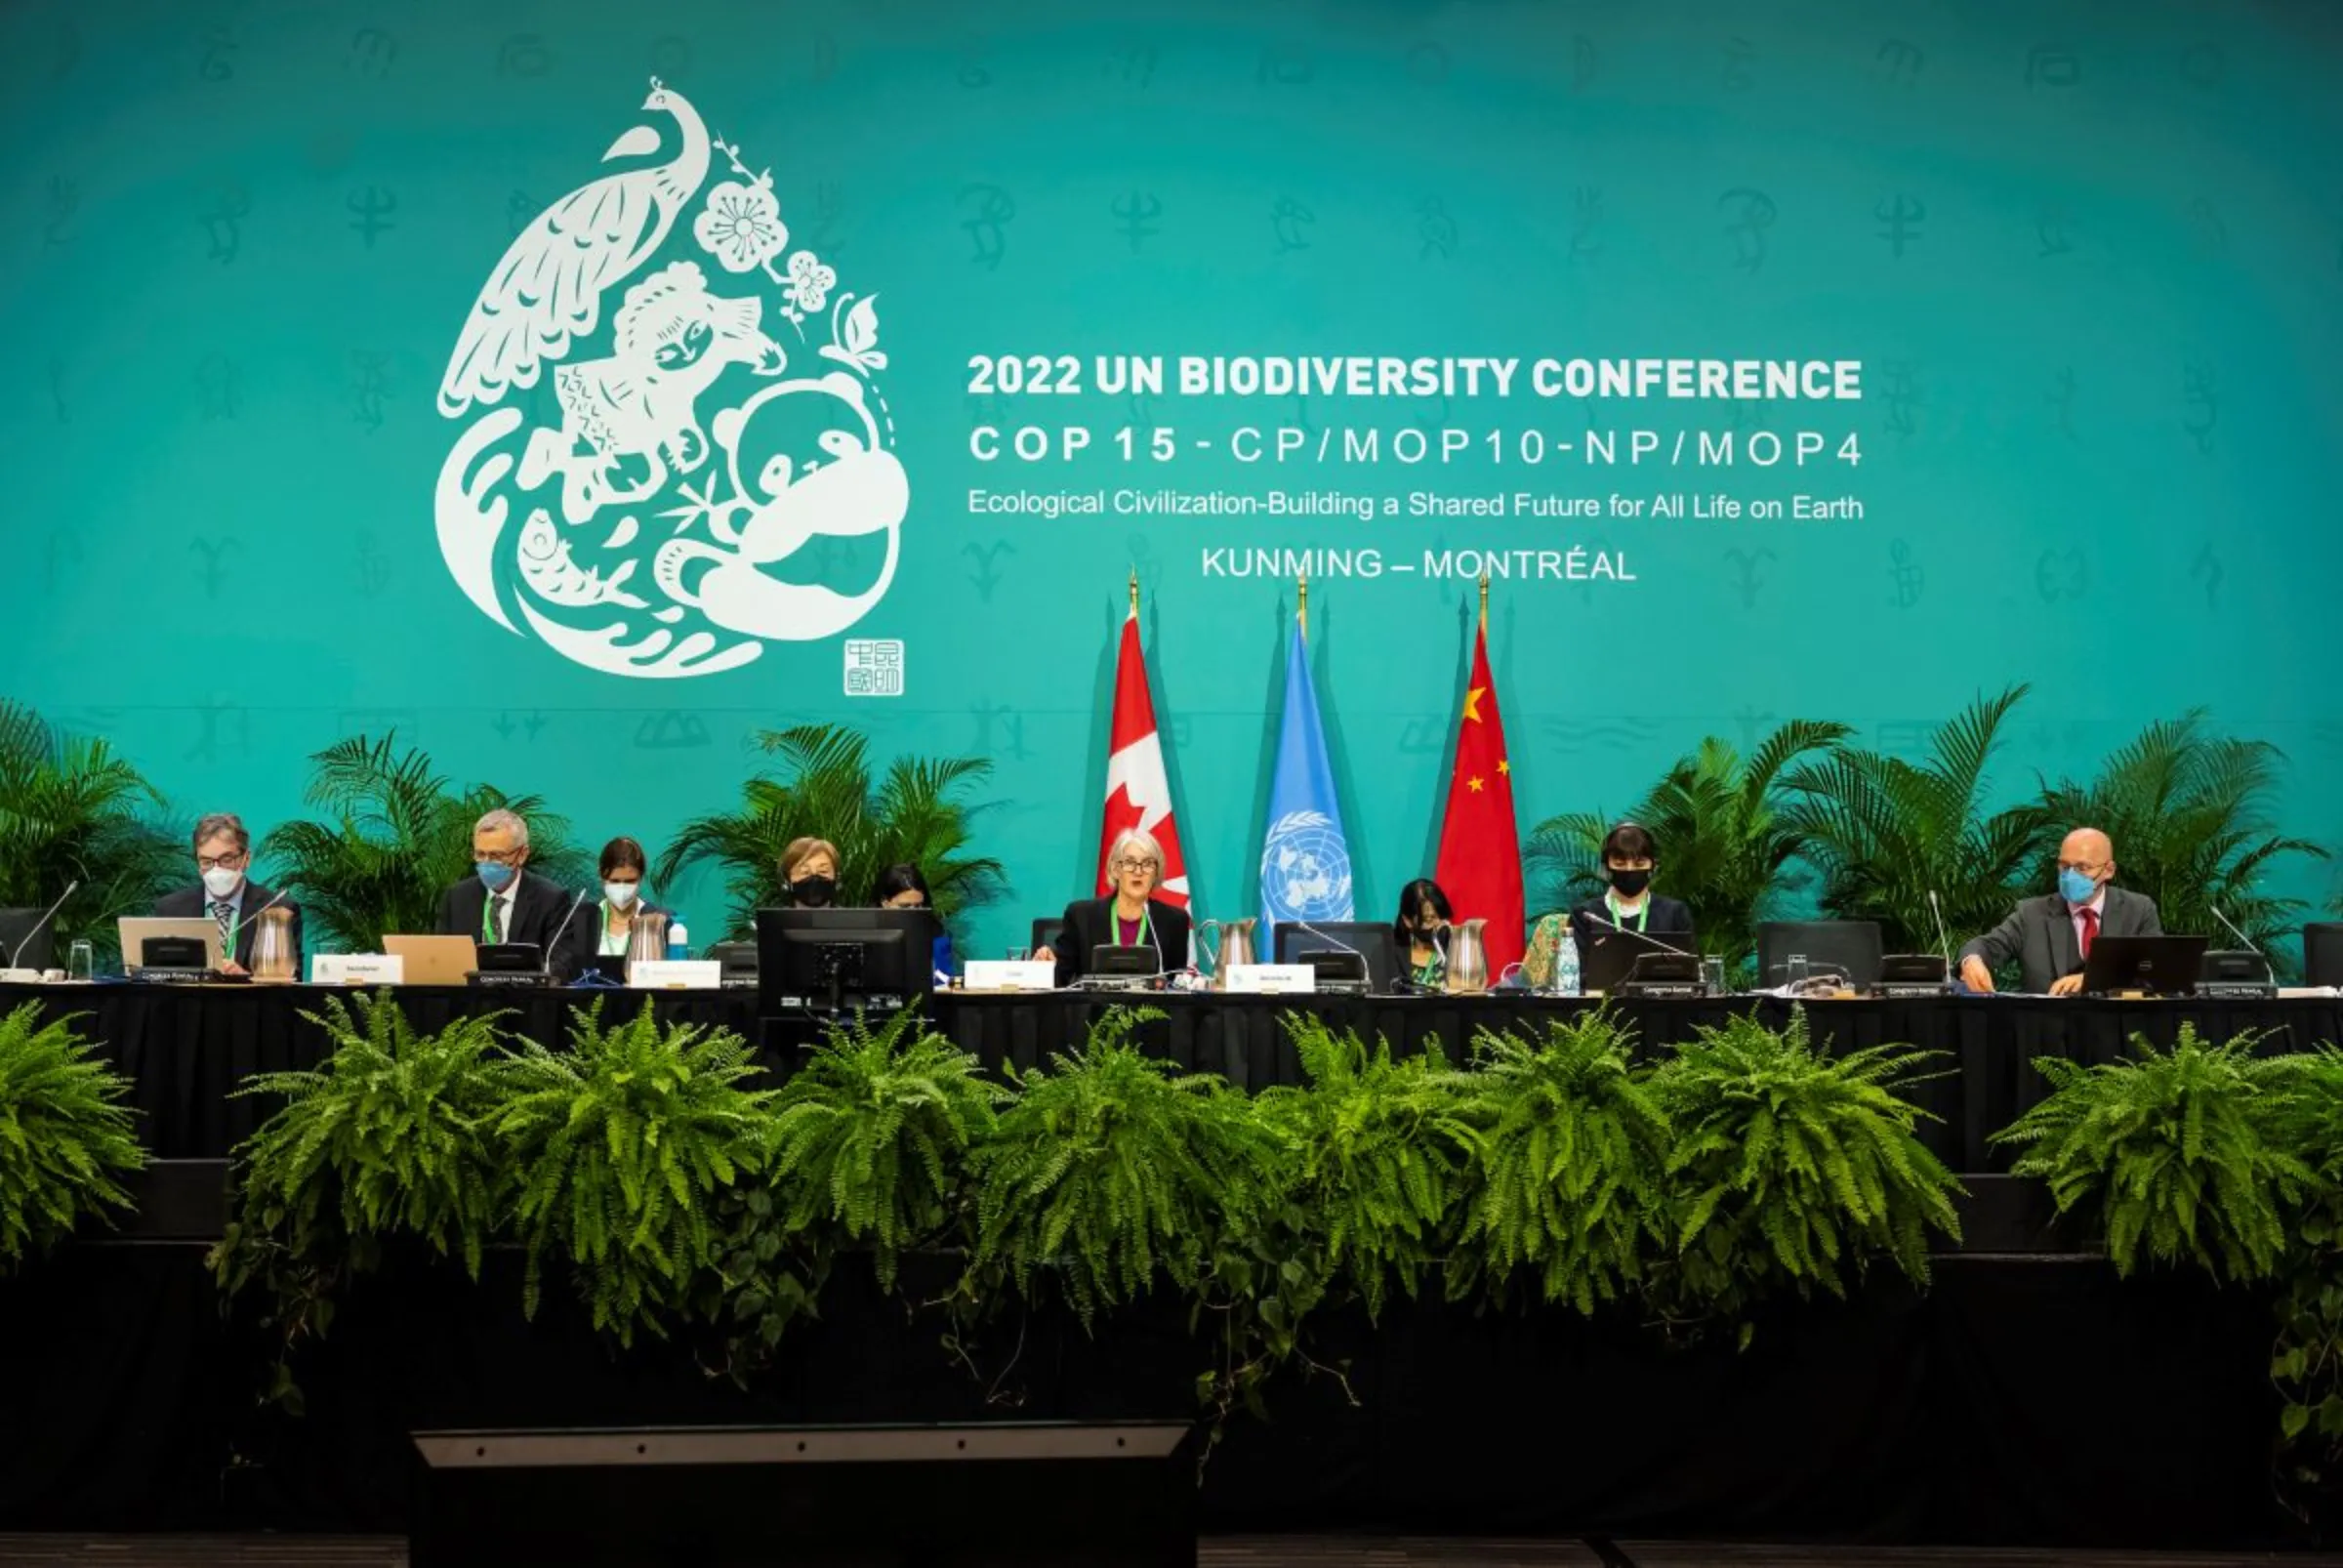 Officials speak during a panel at the COP15 summit on biodiversity in Montreal, Canada, 7 December 2022. UN Biodiversity / Handout via Thomson Reuters Foundation